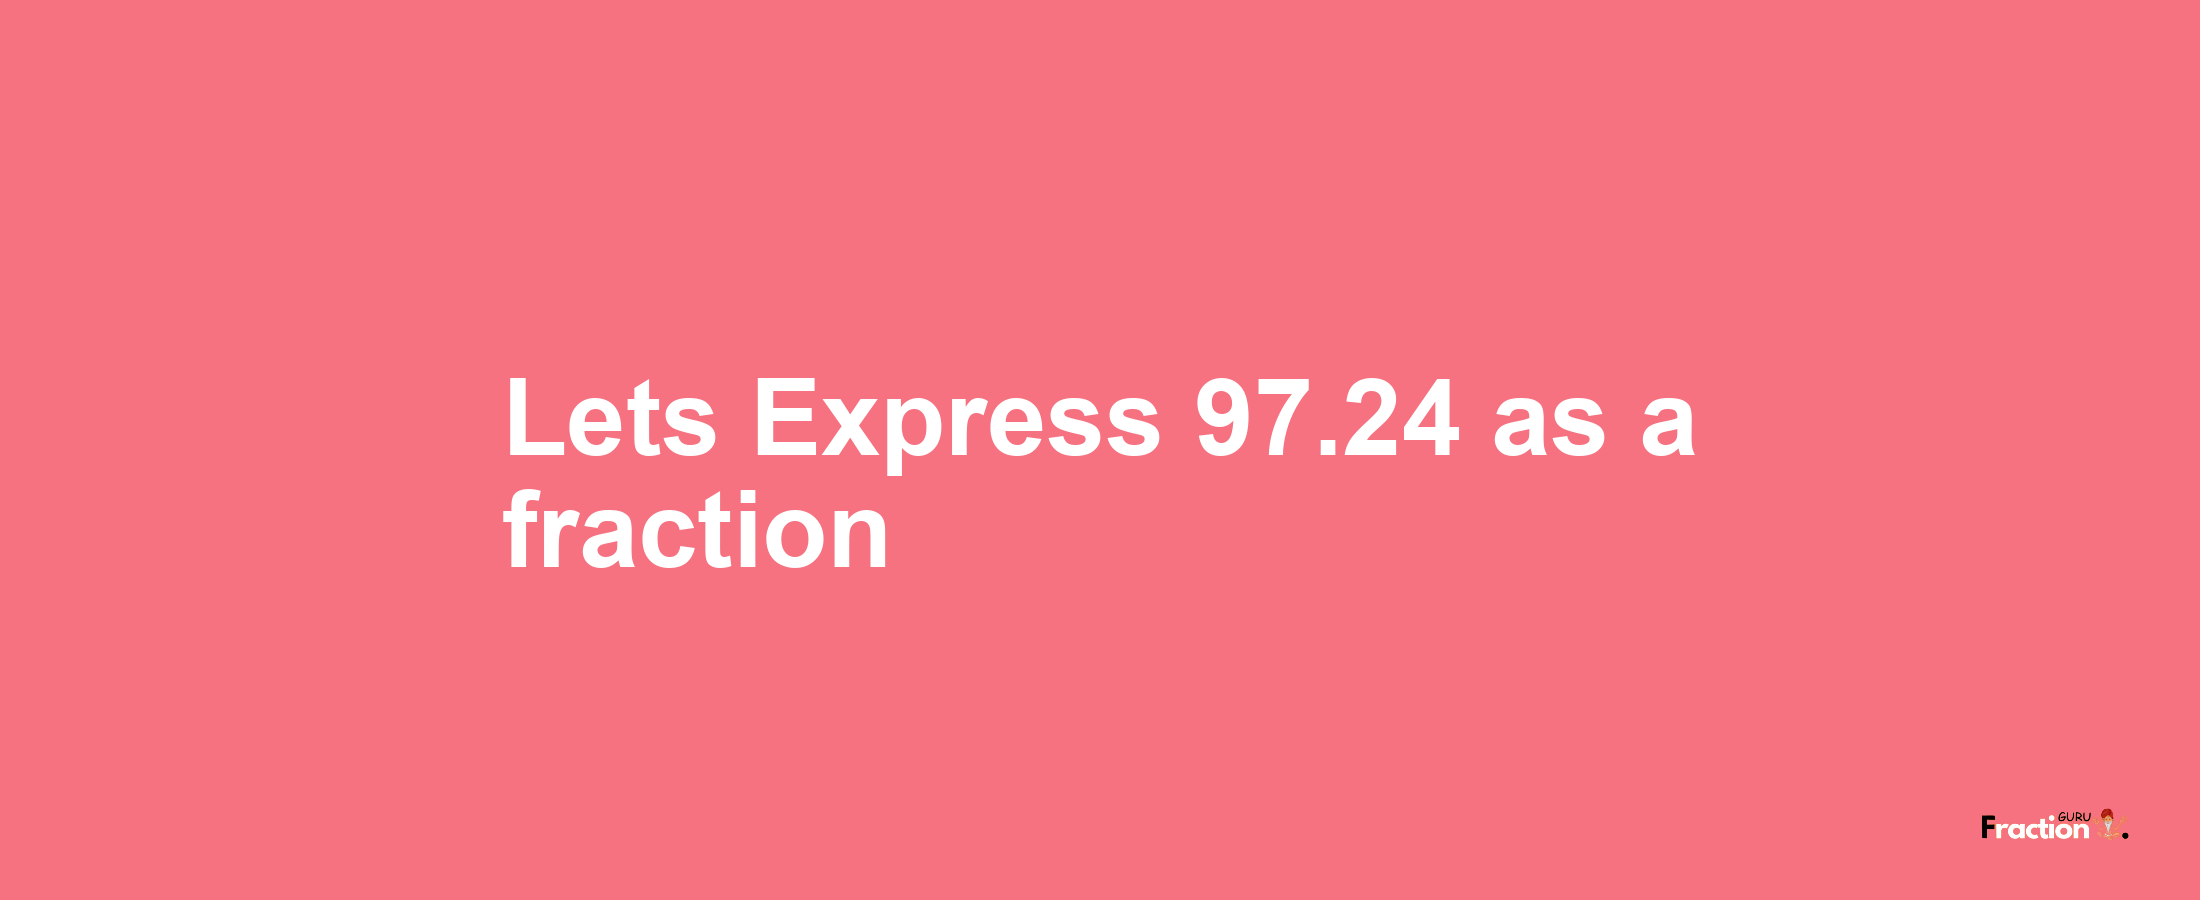 Lets Express 97.24 as afraction